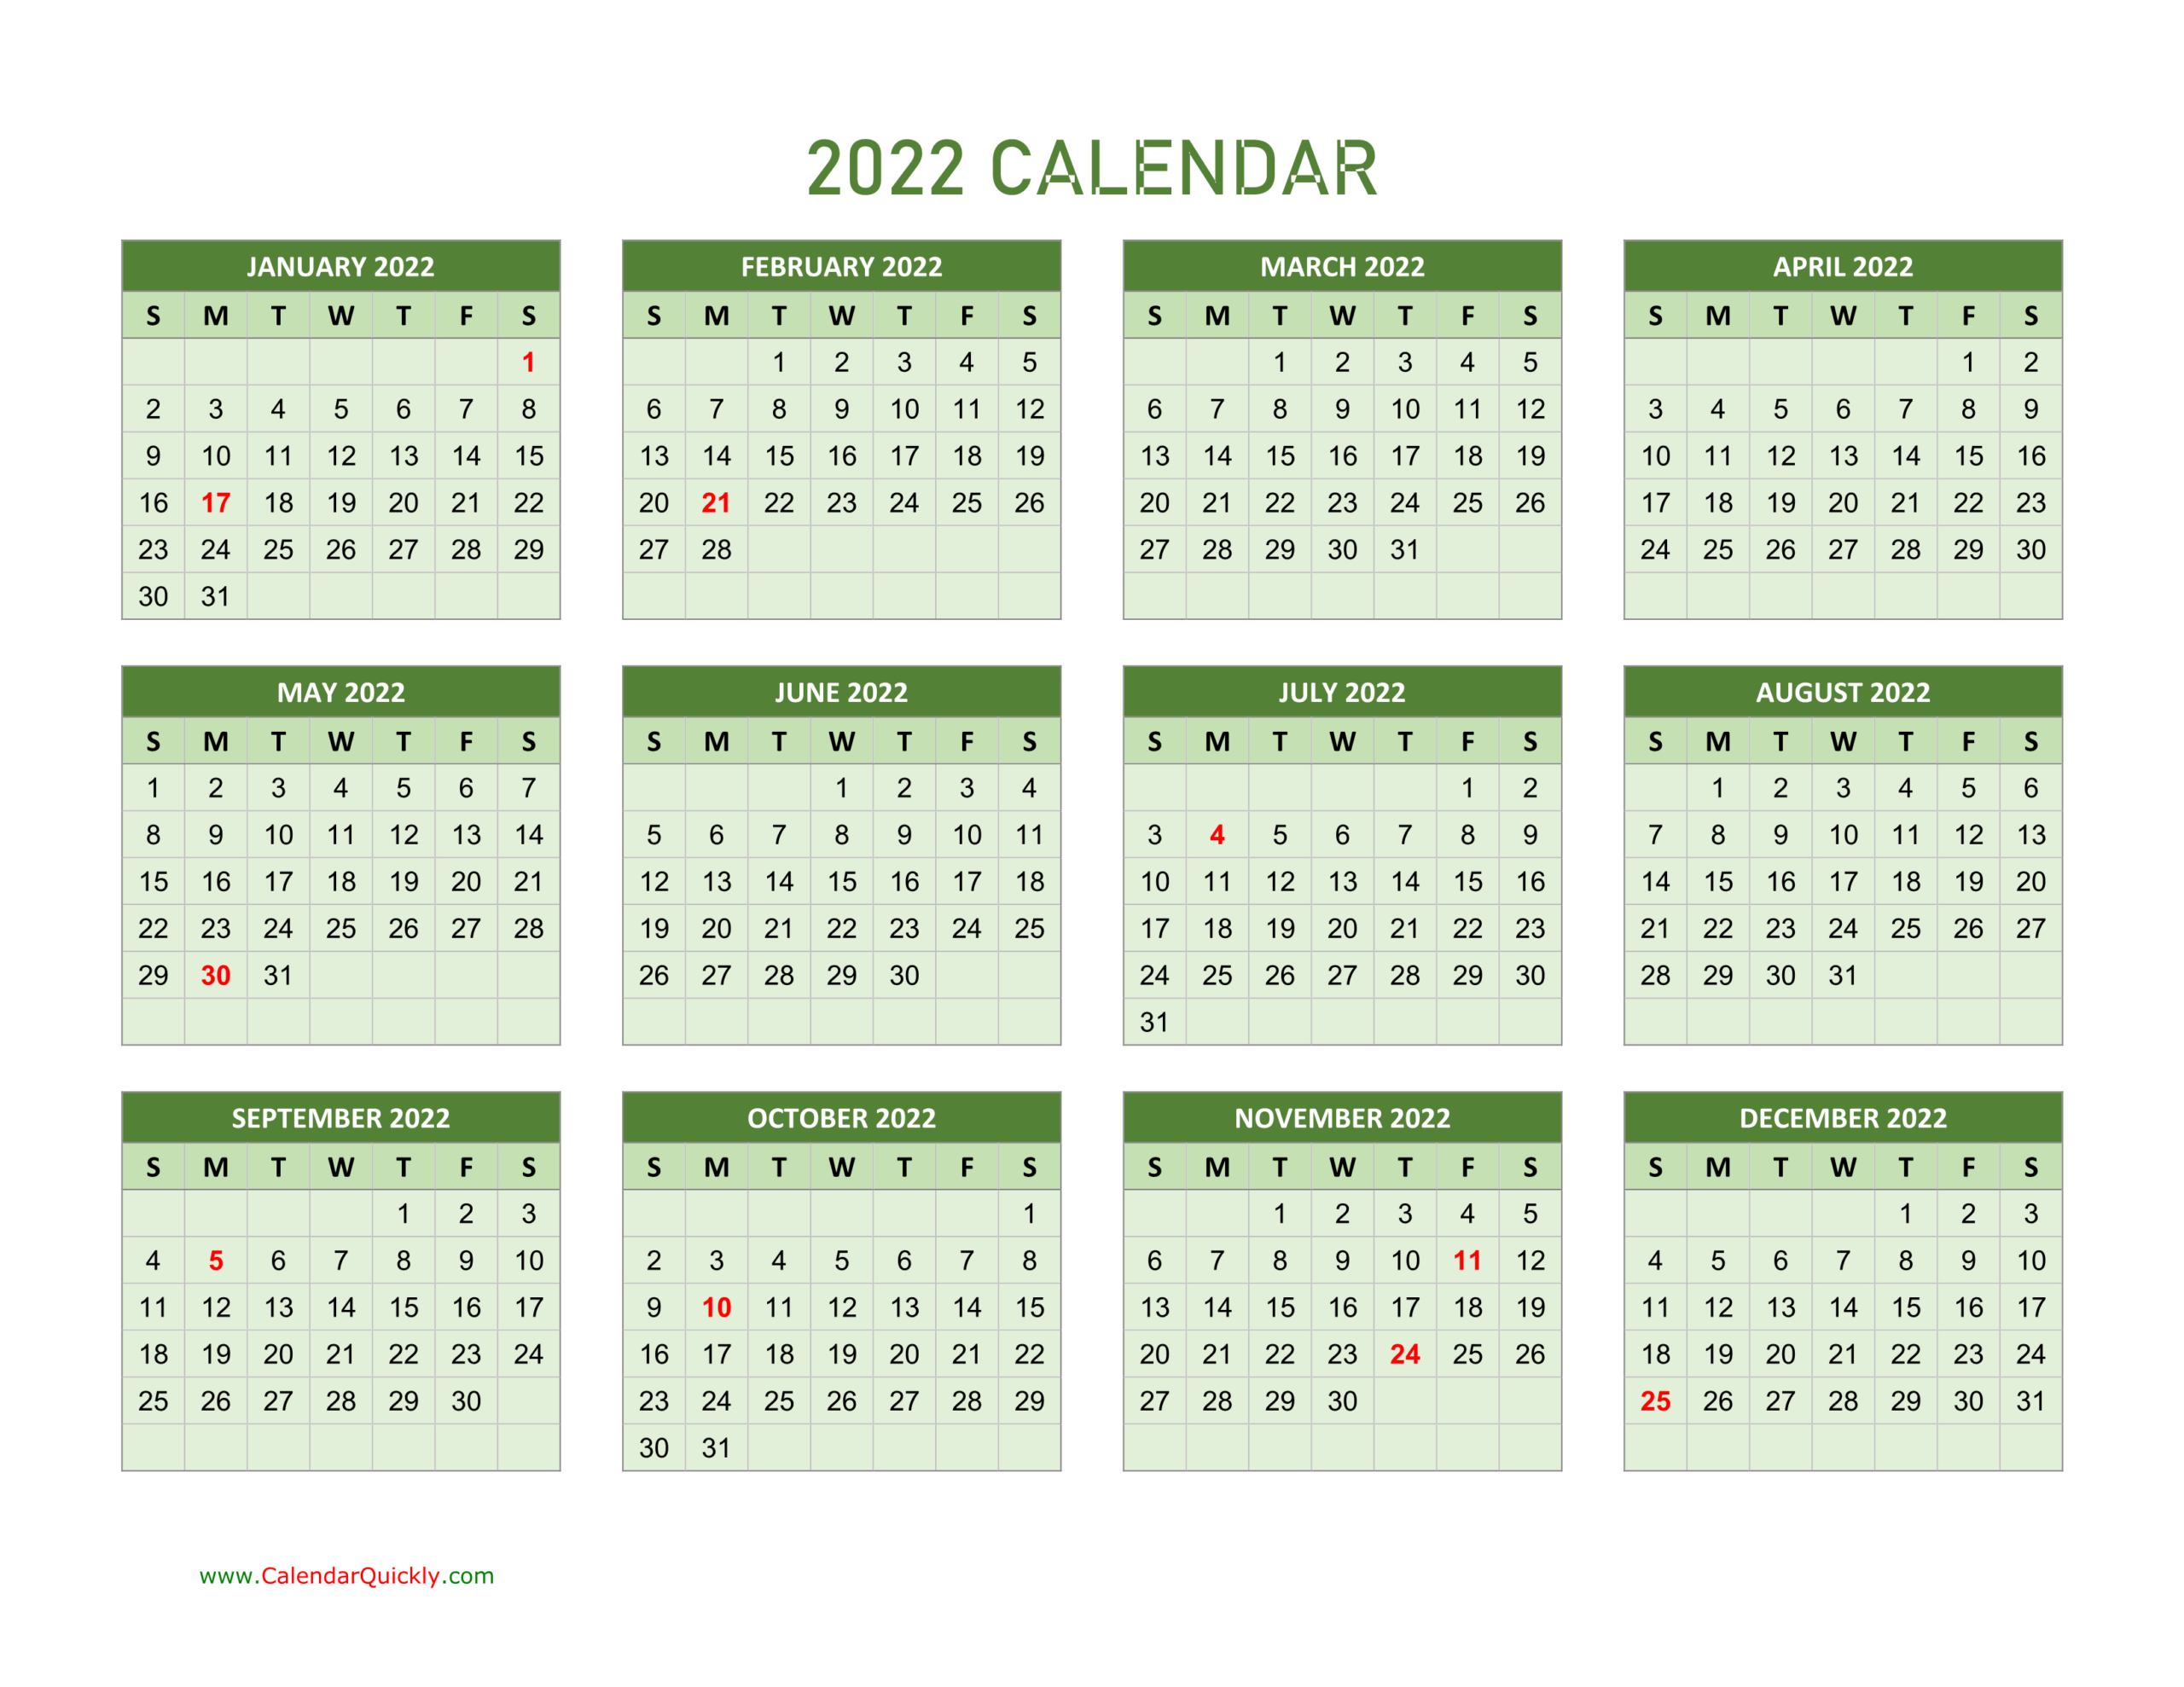 Yearly Calendar 2022 | Calendar Quickly  Free Printable Calendar 2022 And 2022 With Holidays